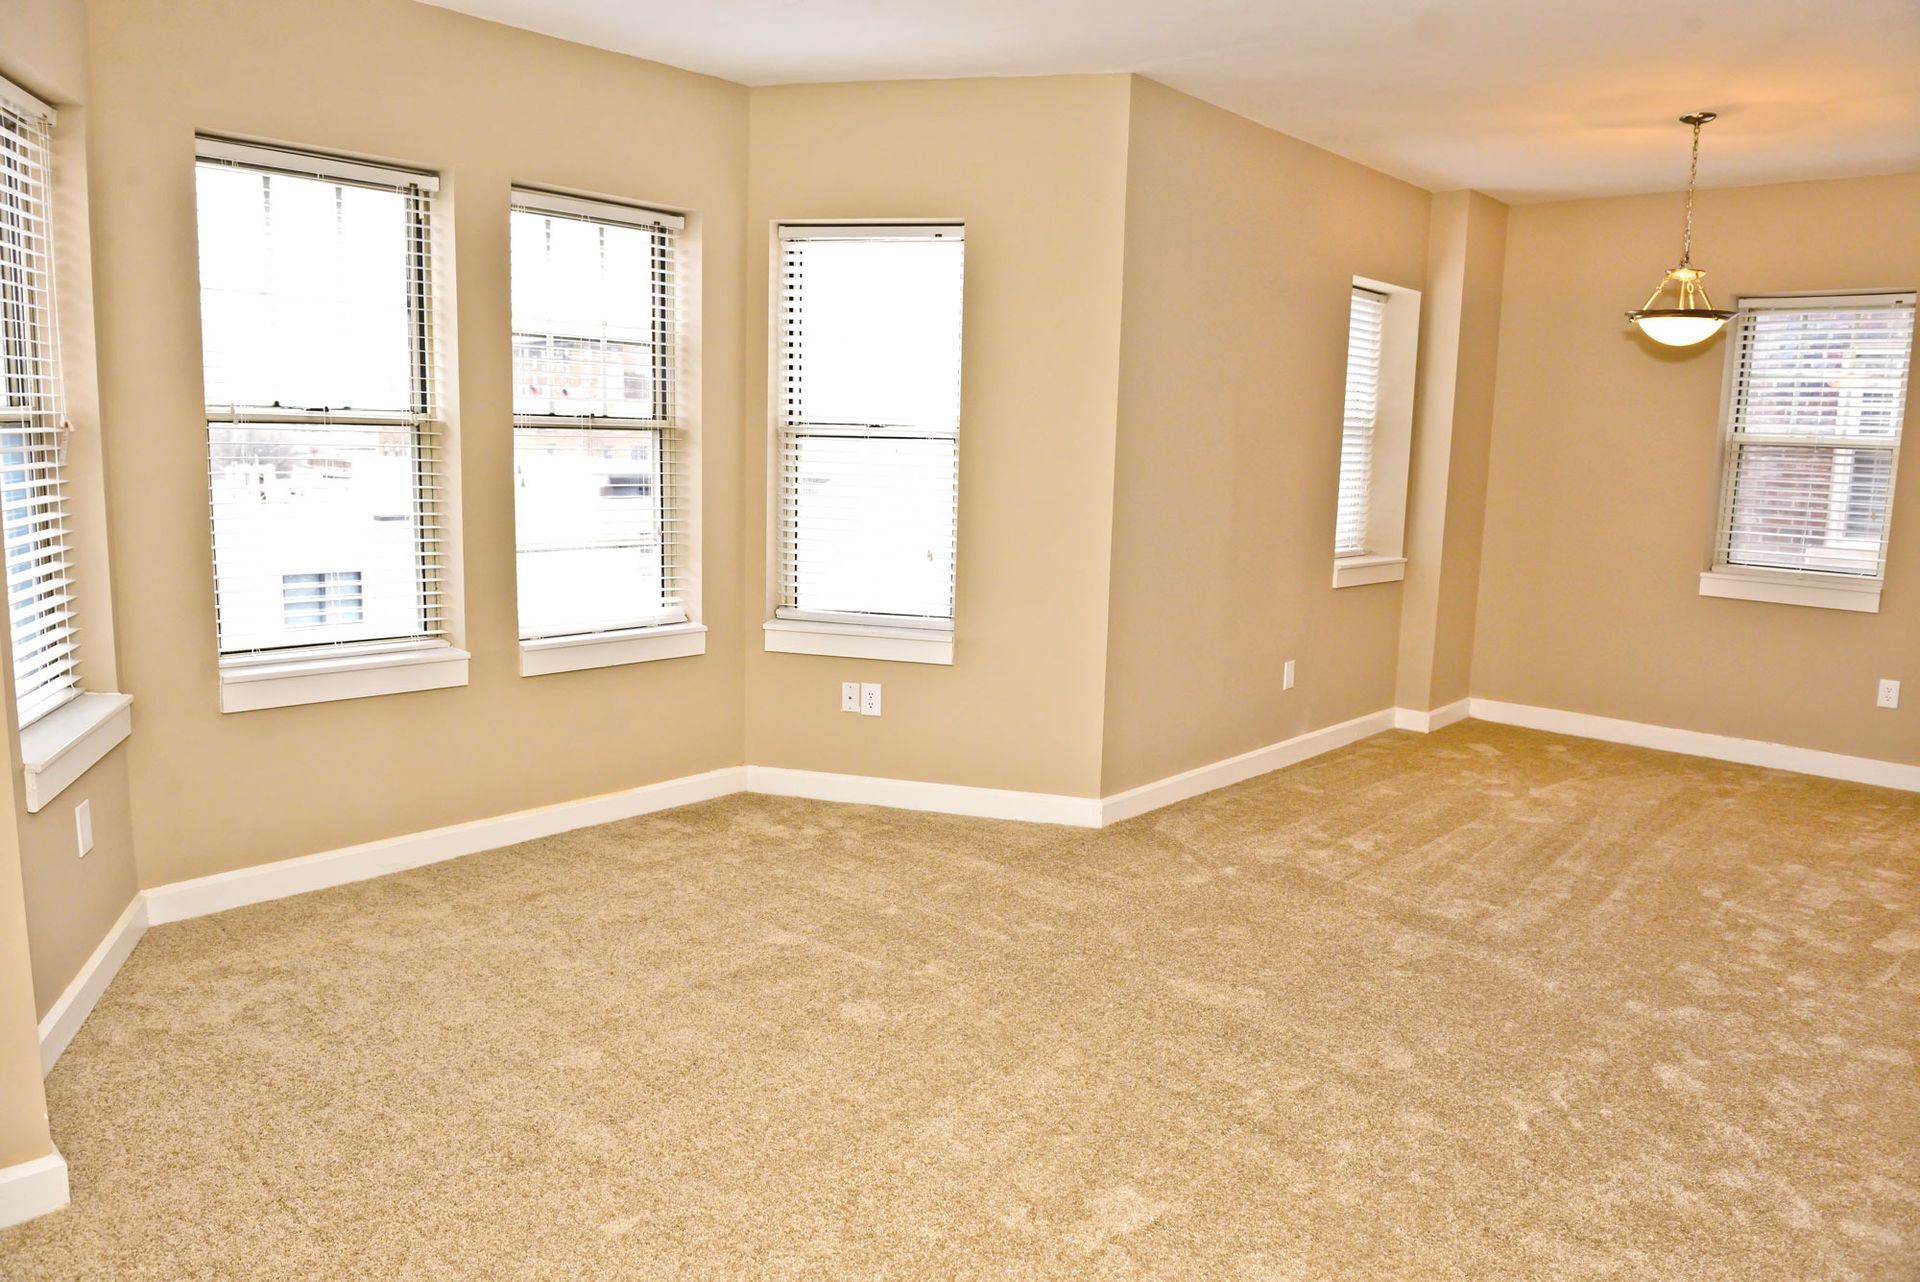 Carpeted living room at Circle City in Indianapolis, IN.